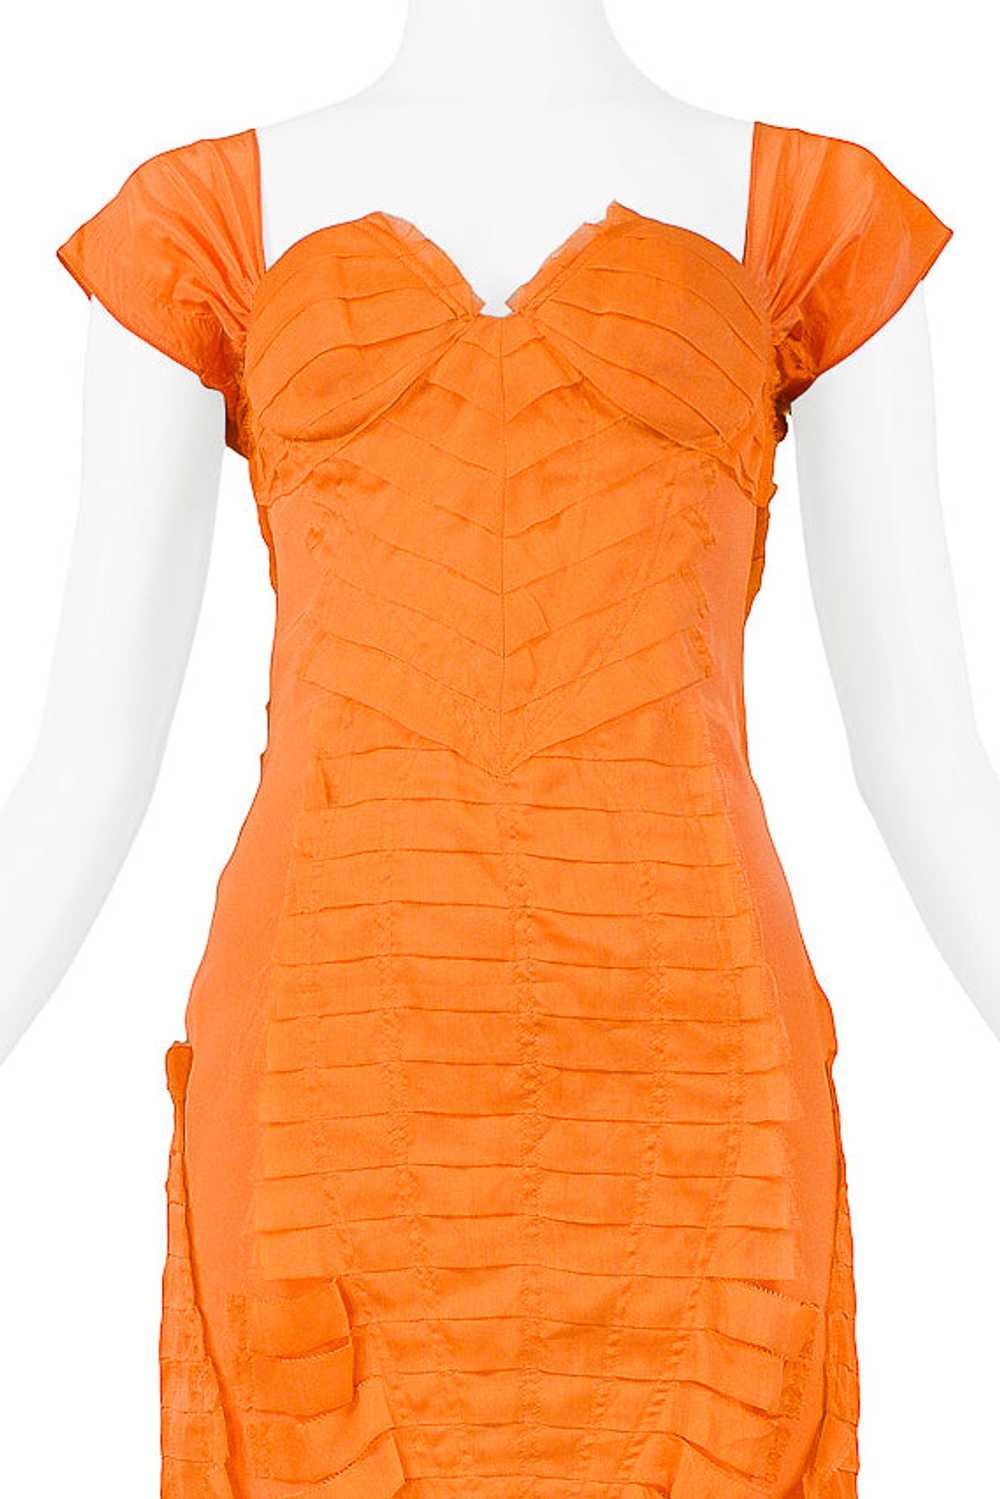 GUCCI BY TOM FORD ORANGE SILK COCKTAIL DRESS 2004 - image 3